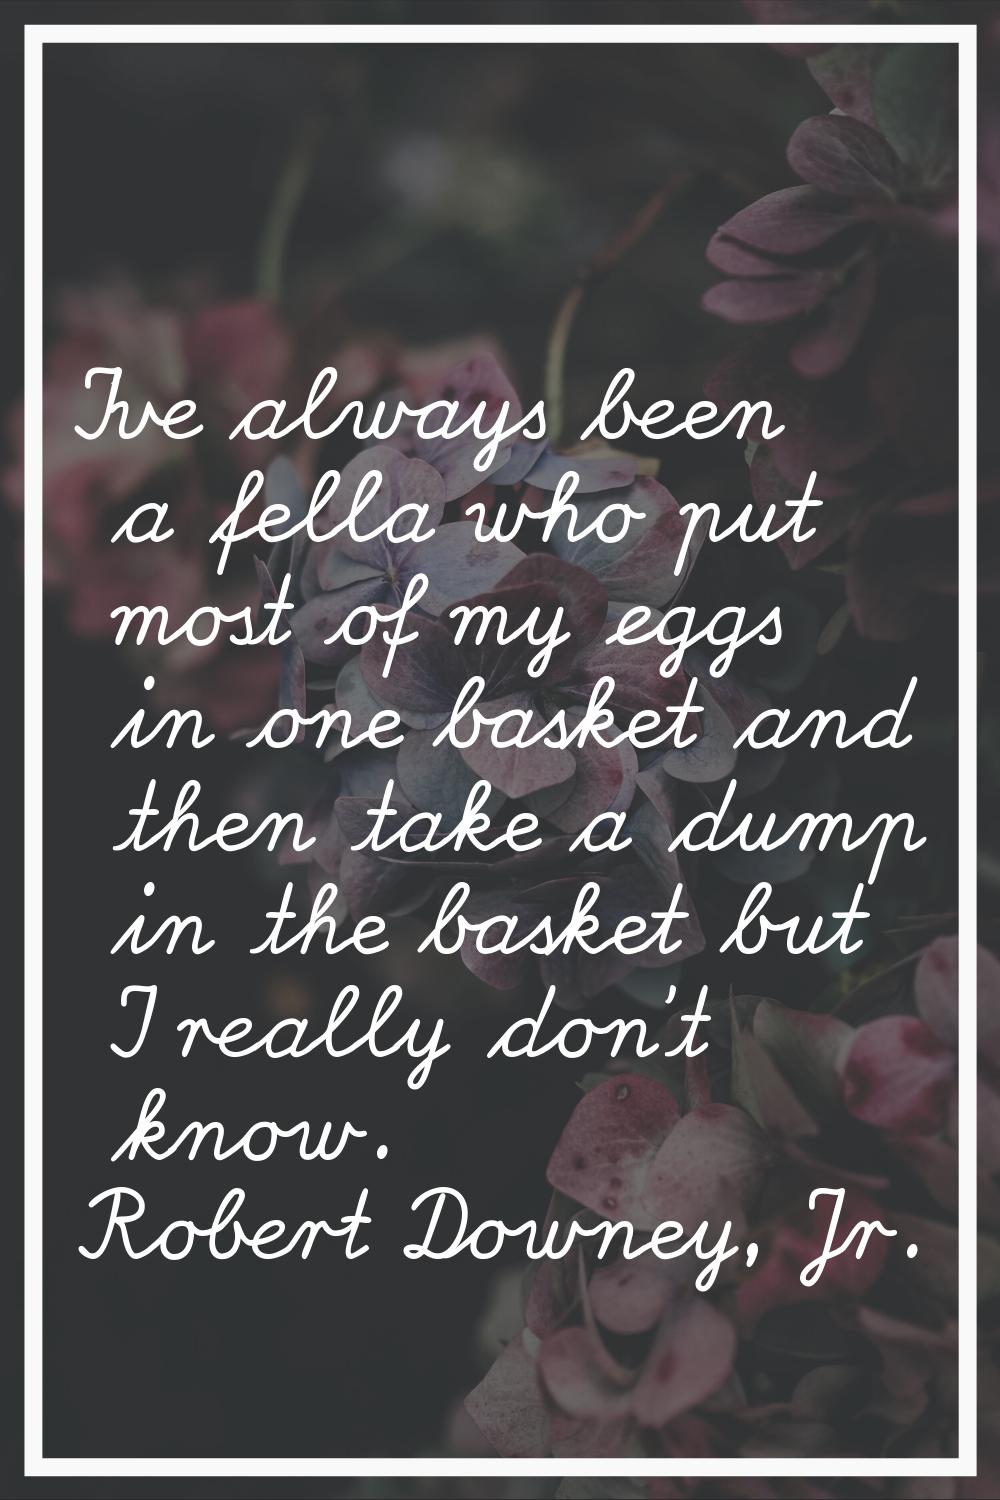 I've always been a fella who put most of my eggs in one basket and then take a dump in the basket b